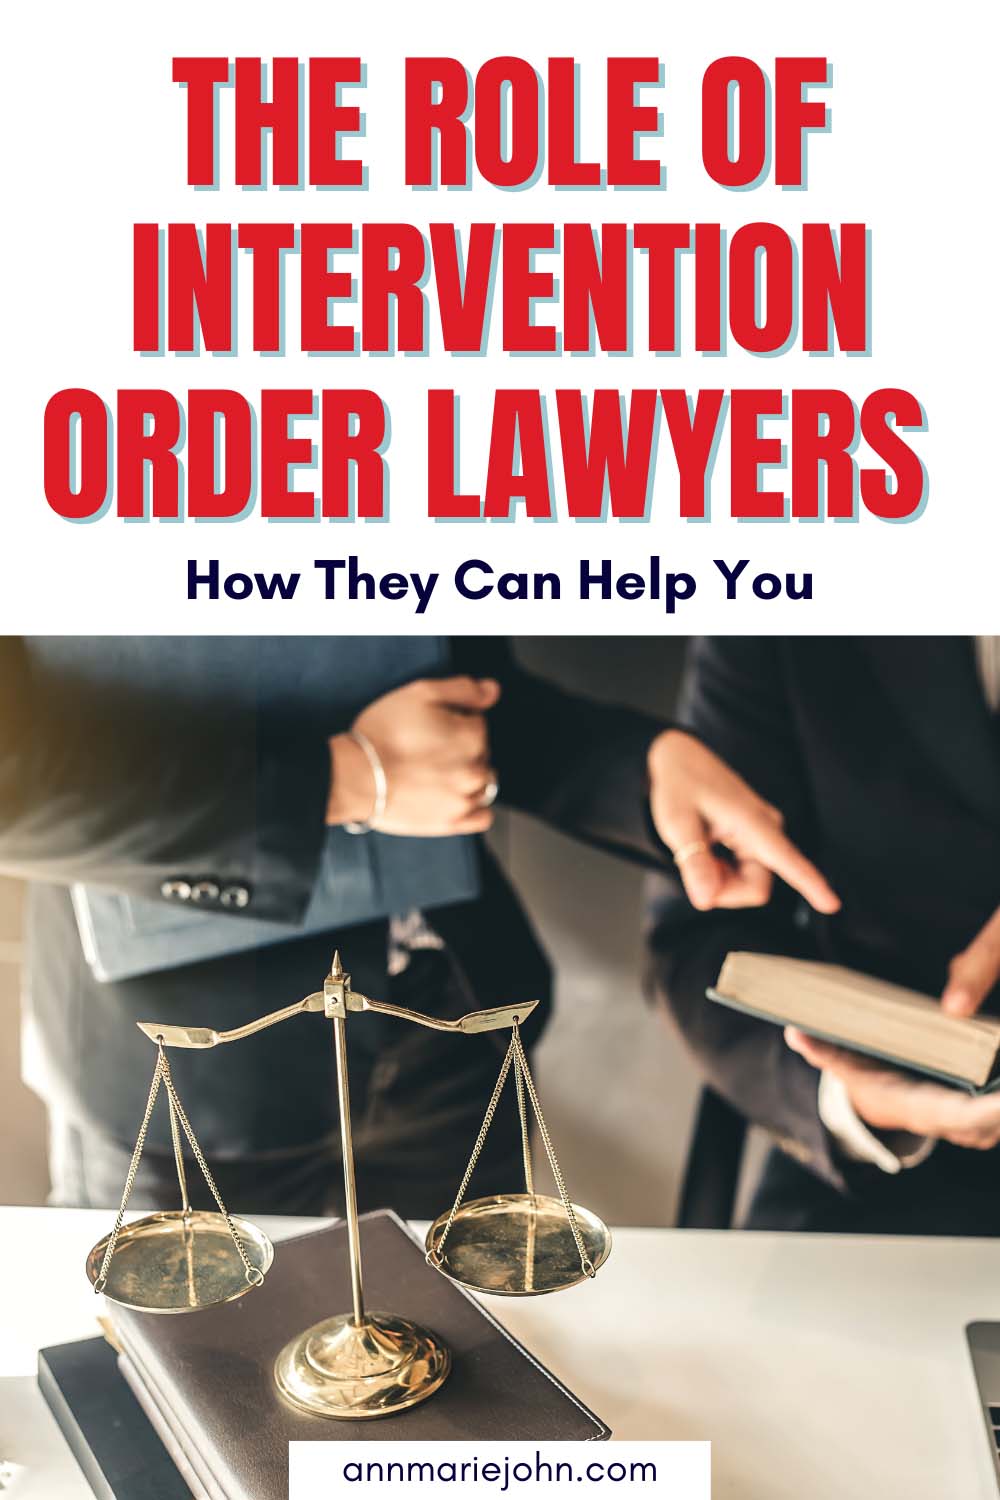 The Role of Intervention Order Lawyers: How They Can Help You